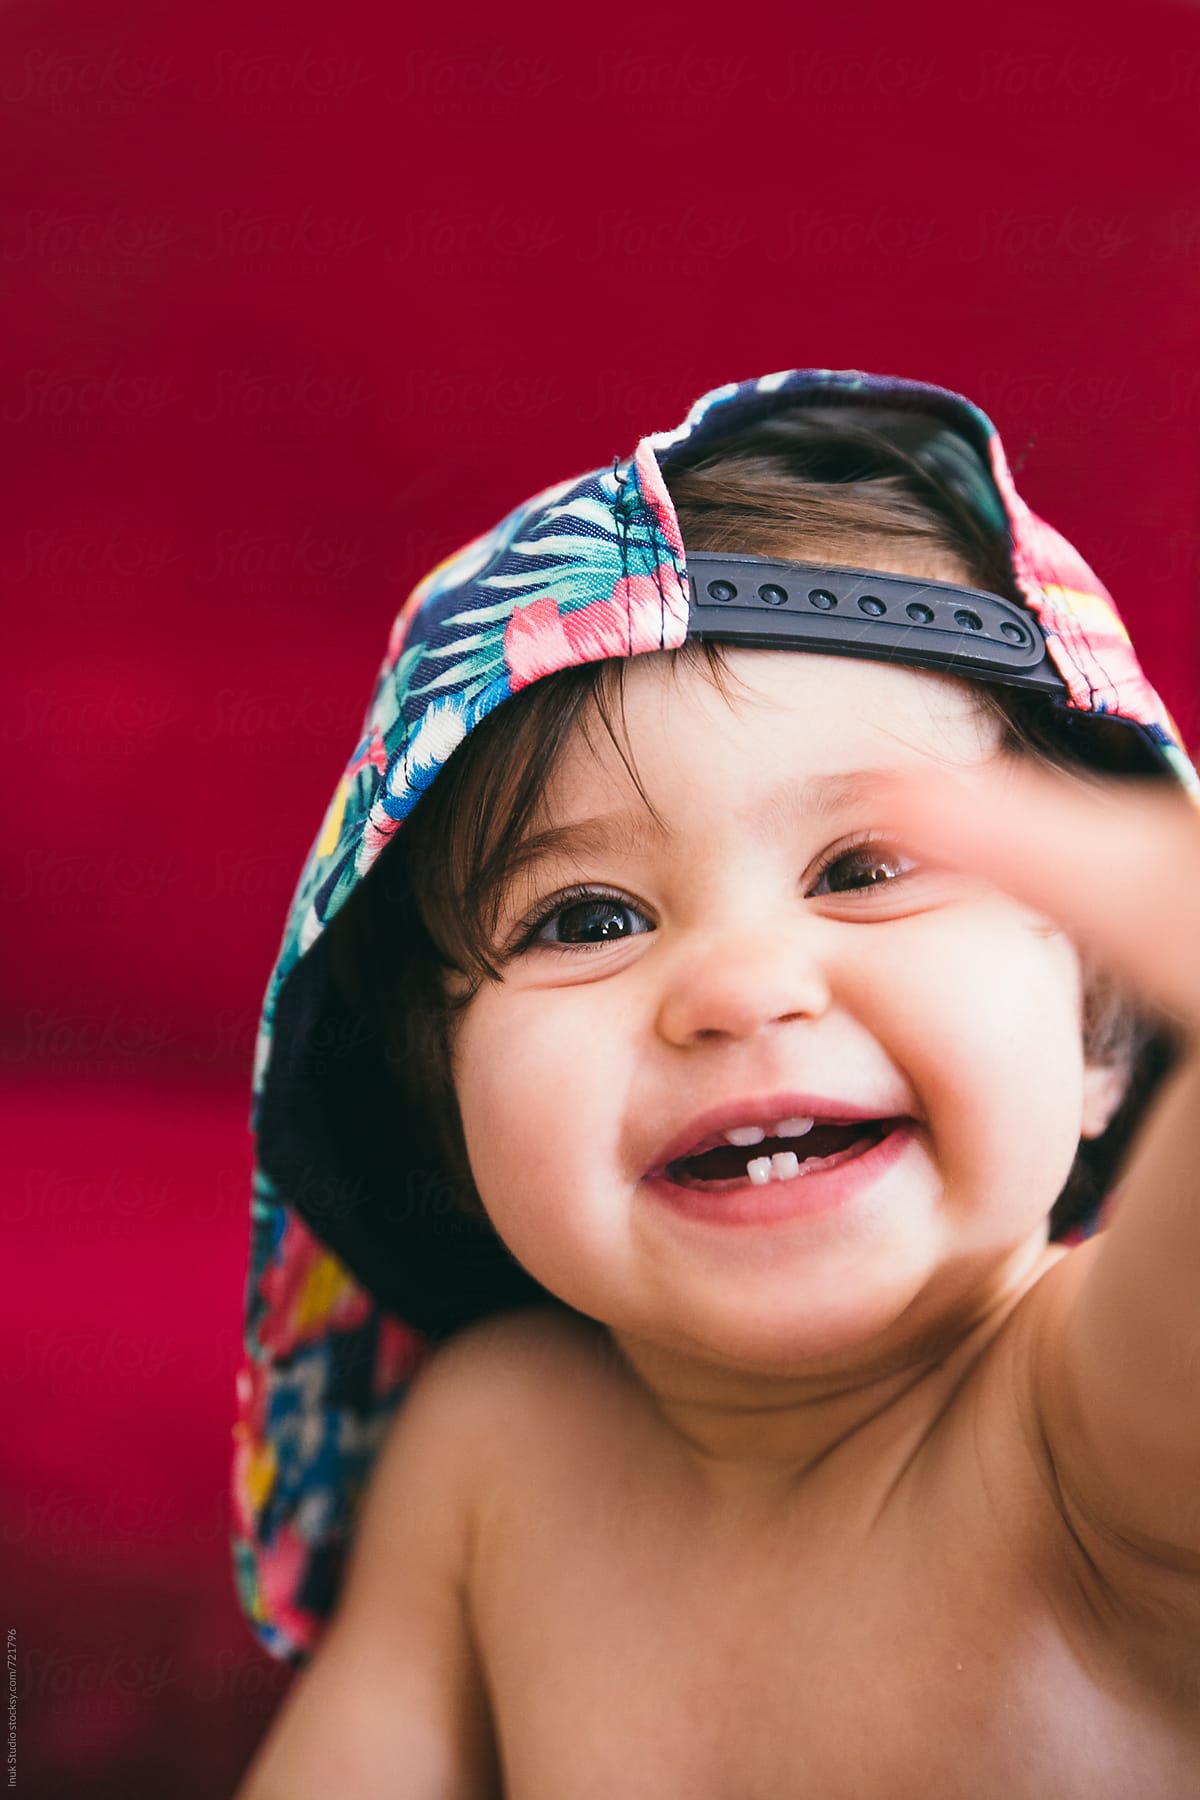 Stylish baby wearing a colourful flower cap smiling and trying to grab the camera